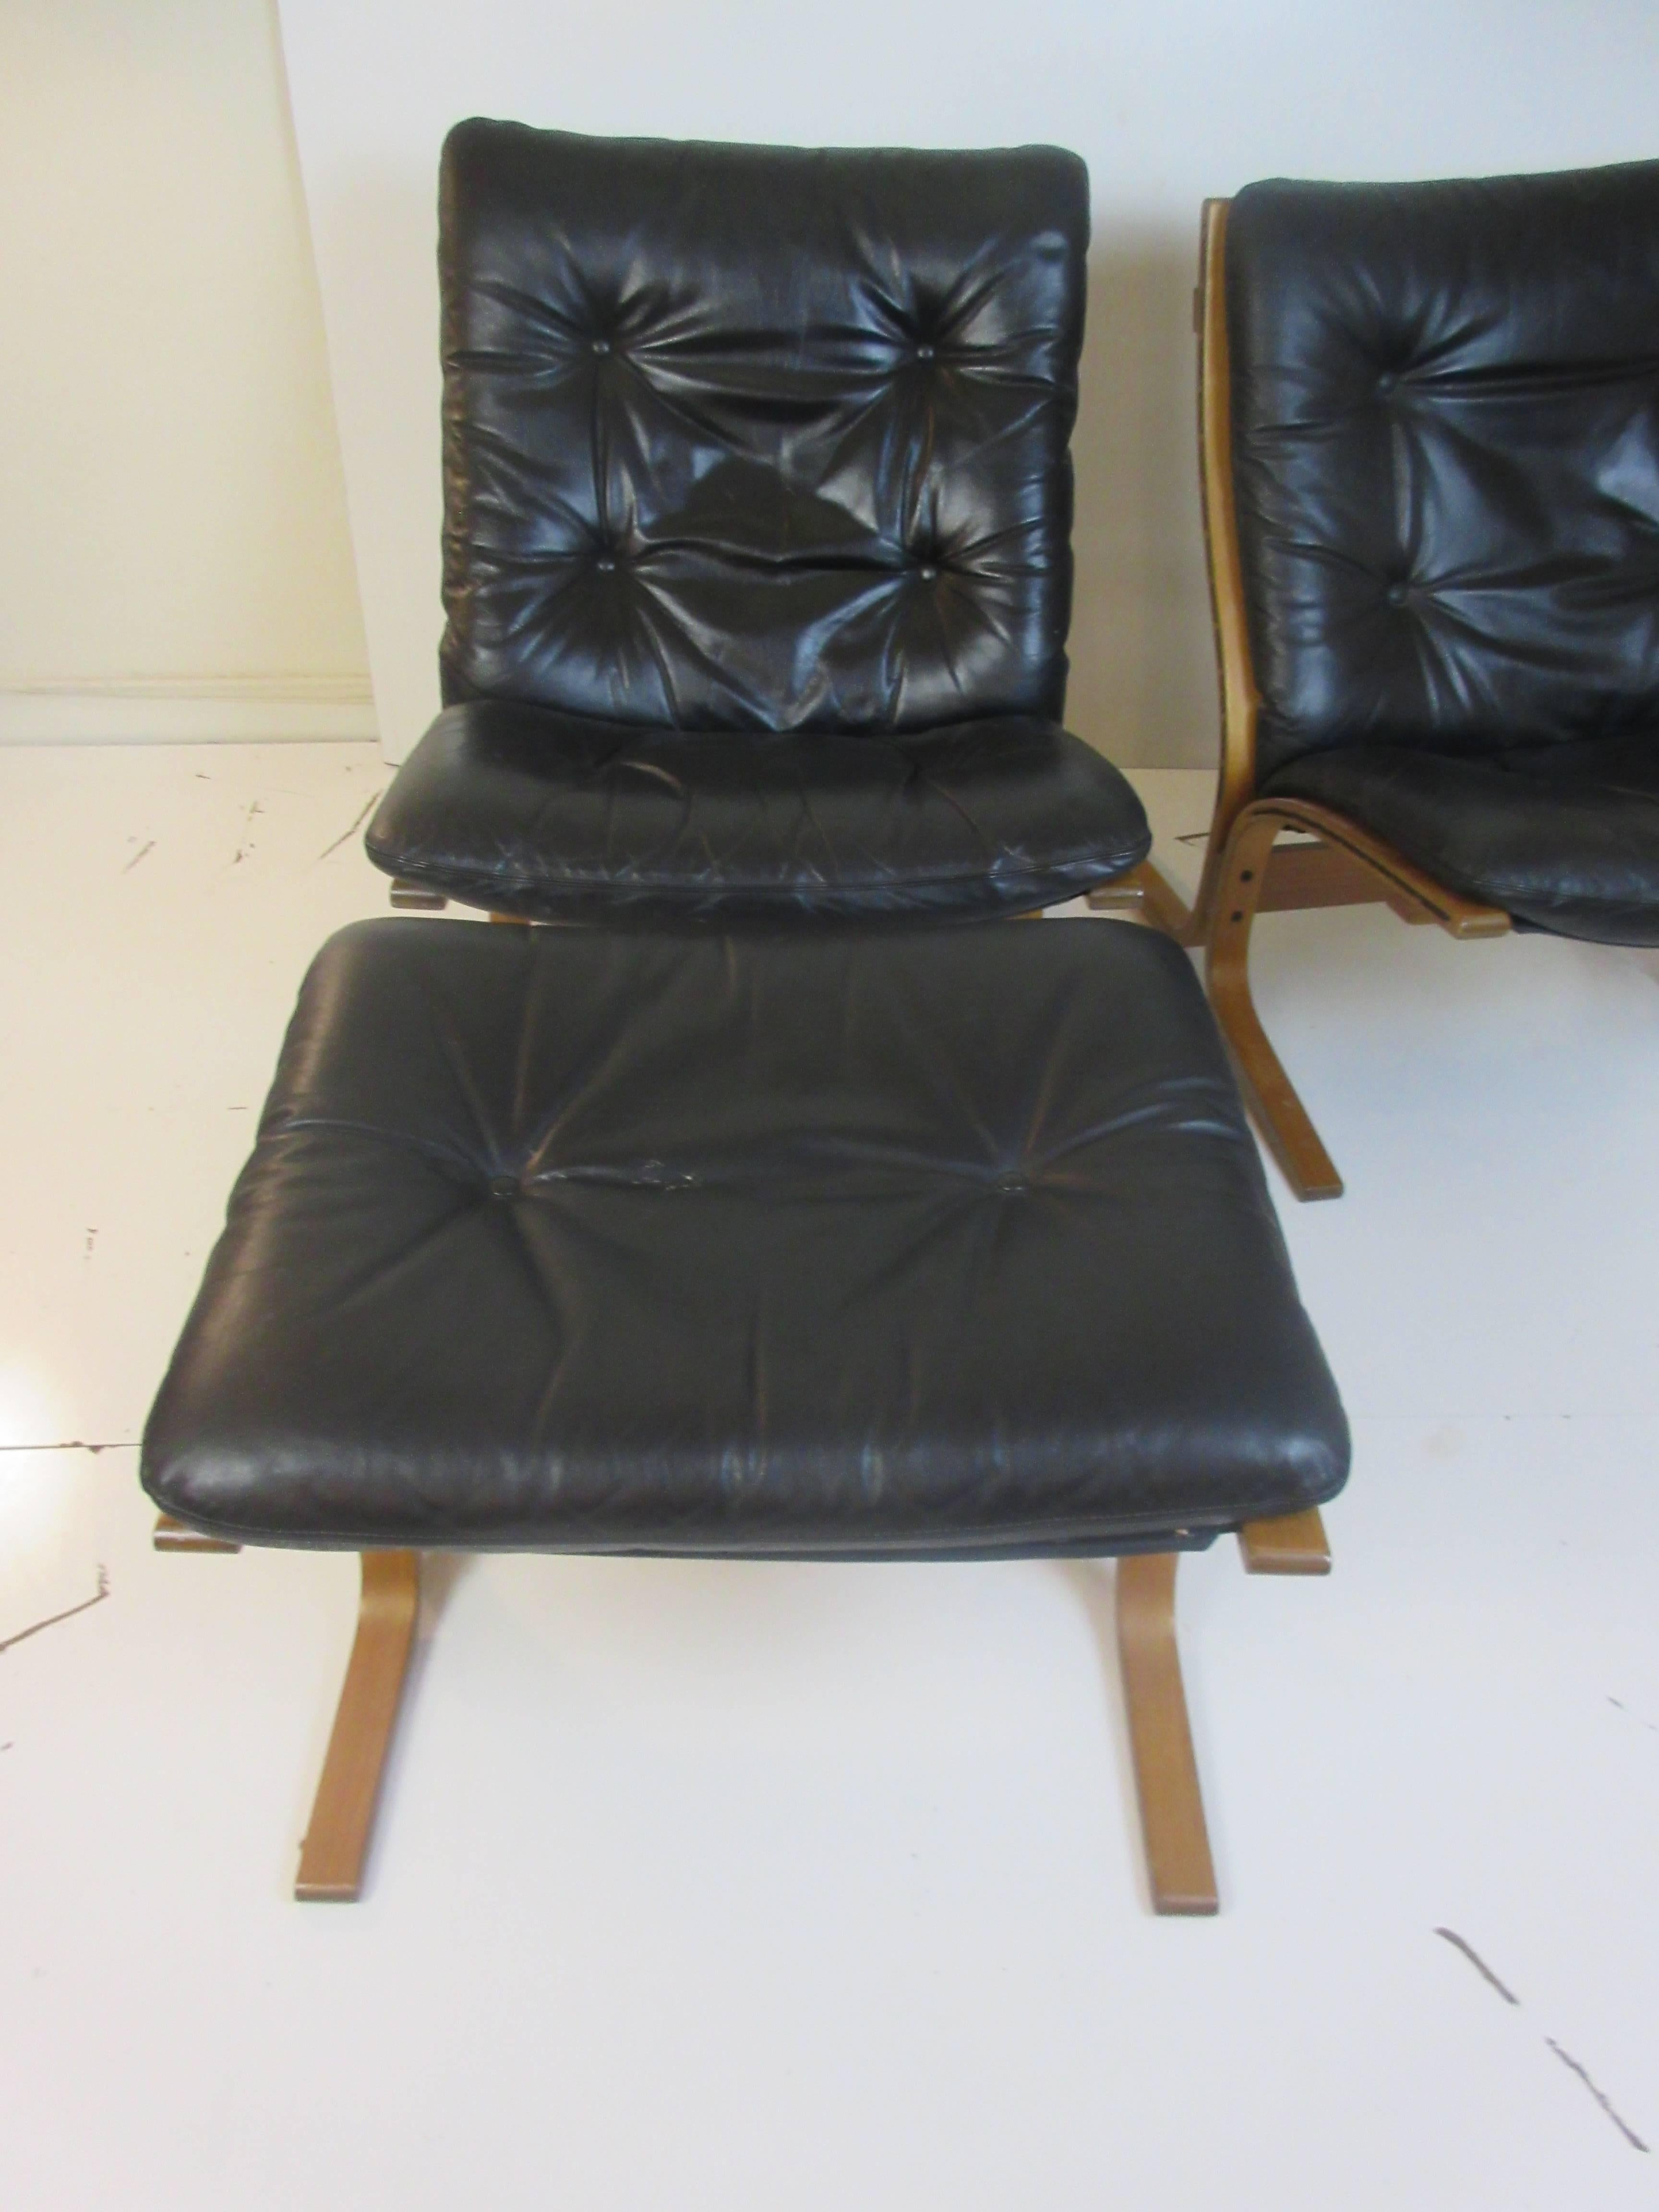 Westnofa Siesta chair and ottoman in leather by Ingmar Relling on bent wood frames made in Norway. Loose cushions are supported by canvas slings tied to frames via grommets. Measurements of the chair alone are 26 wide x 30 deep x 32 high and seat is